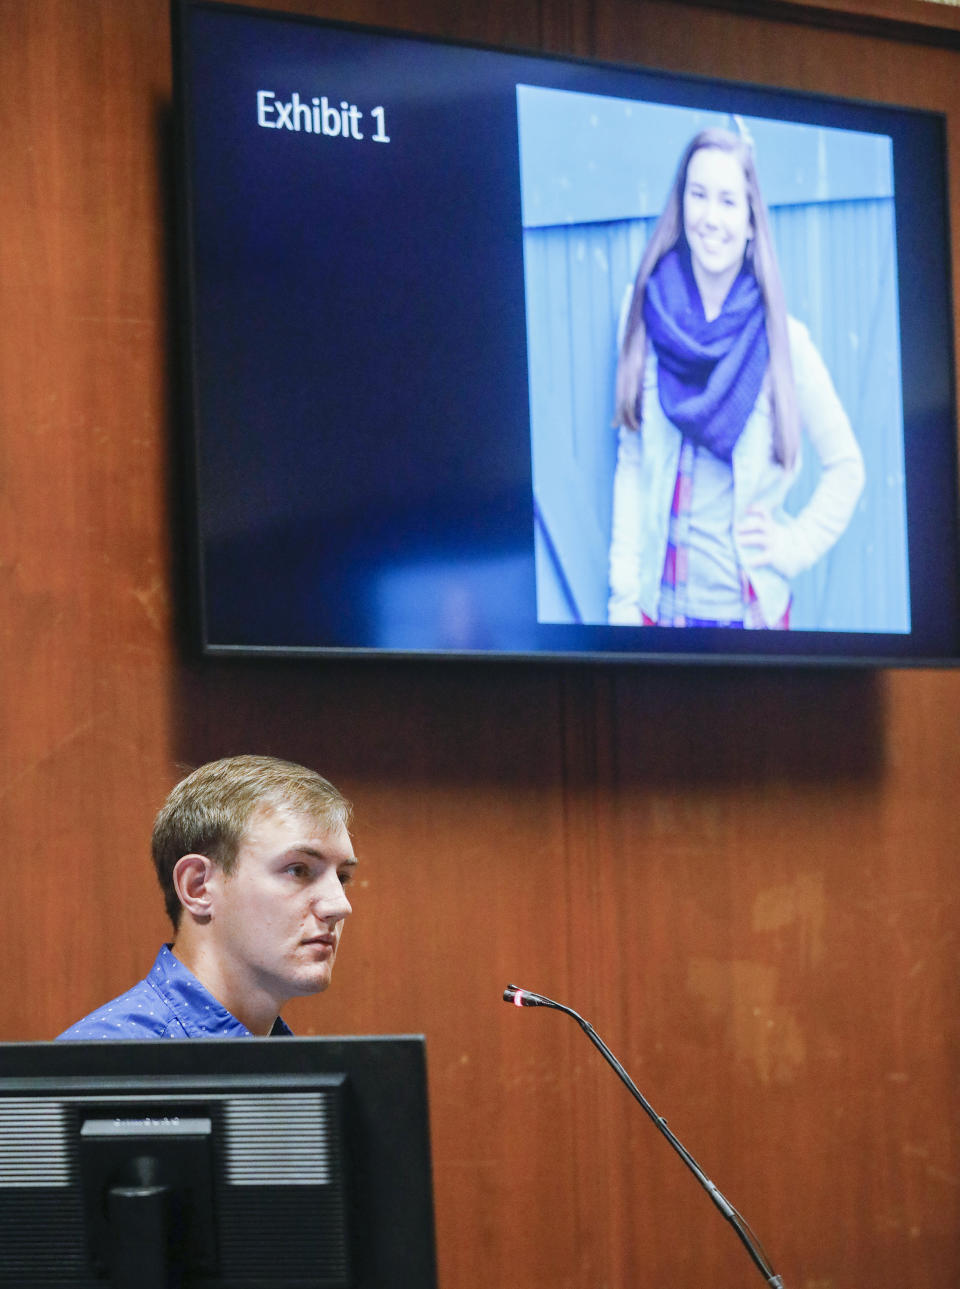 A photograph of Mollie Tibbetts is shown in the courtroom as Dalton Jack testifies during the trial of Cristhian Bahena Rivera at the Scott County Courthouse in Davenport, Iowa, on Wednesday, May 19, 2021. Rivera is charged with first-degree murder in the death of Tibbetts. Jack was Tibbetts' boyfriend at the time of her death. (Jim Slosiarek/The Gazette via AP, Pool)